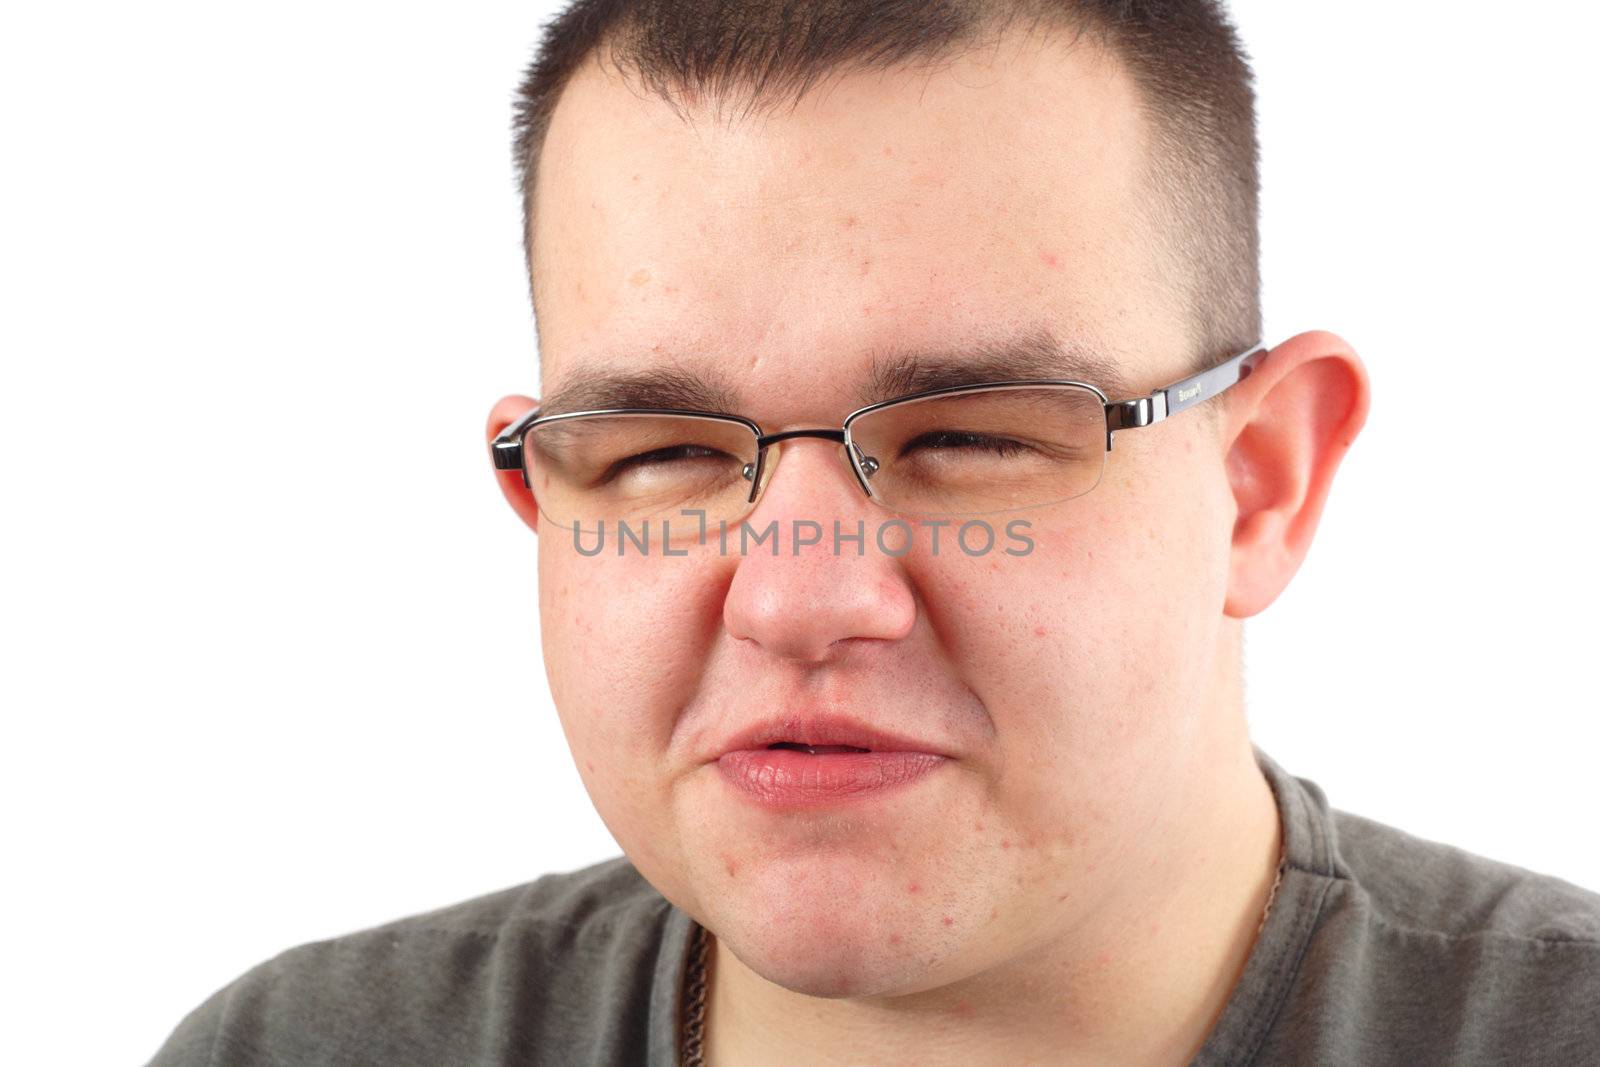 Obese man thoughtful portrait photo on the white background